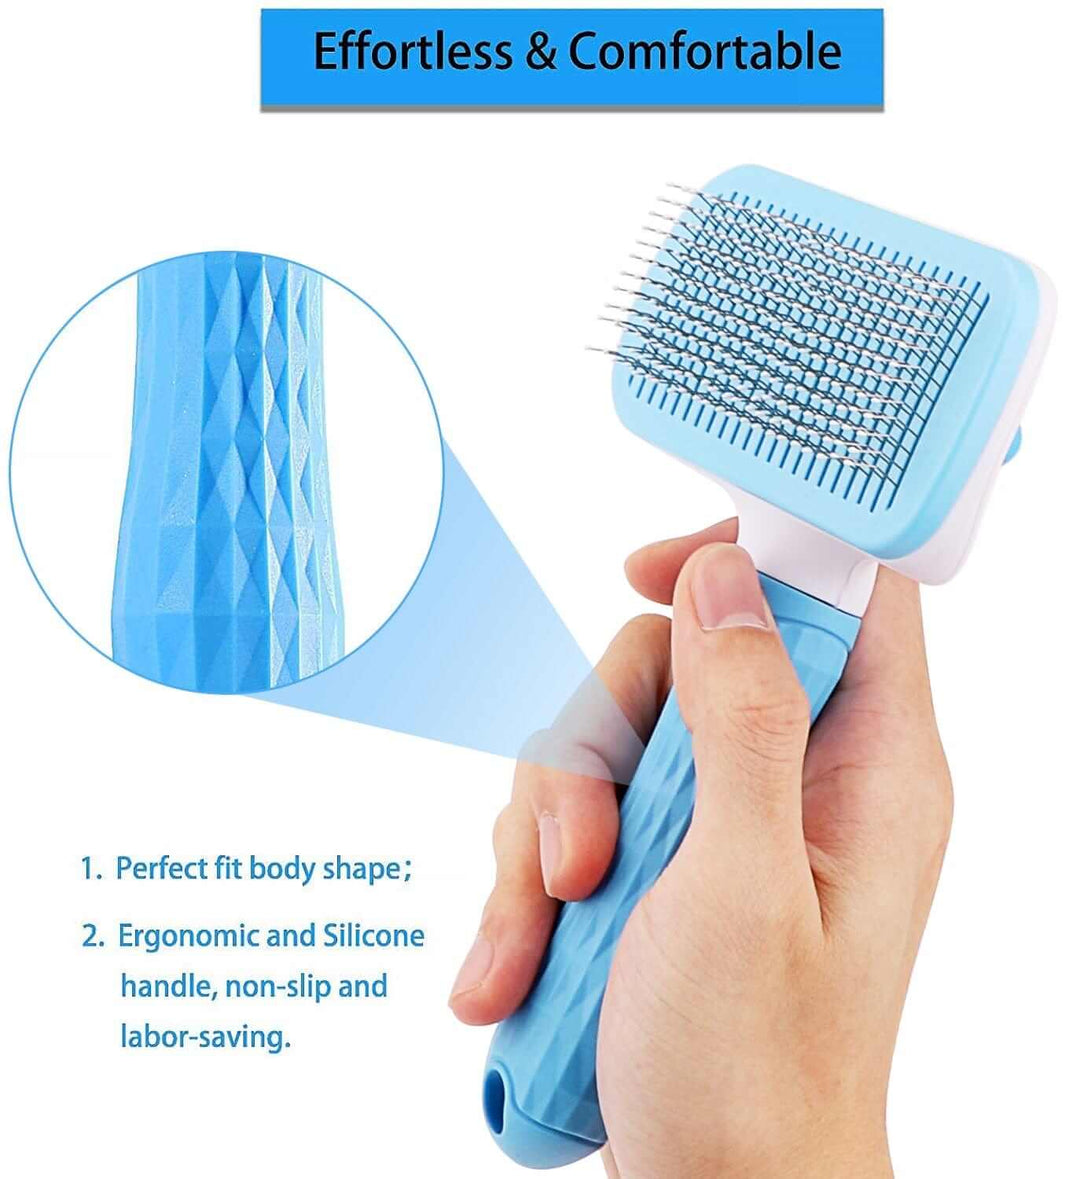 Hair Remover Brush for DogGROOMING